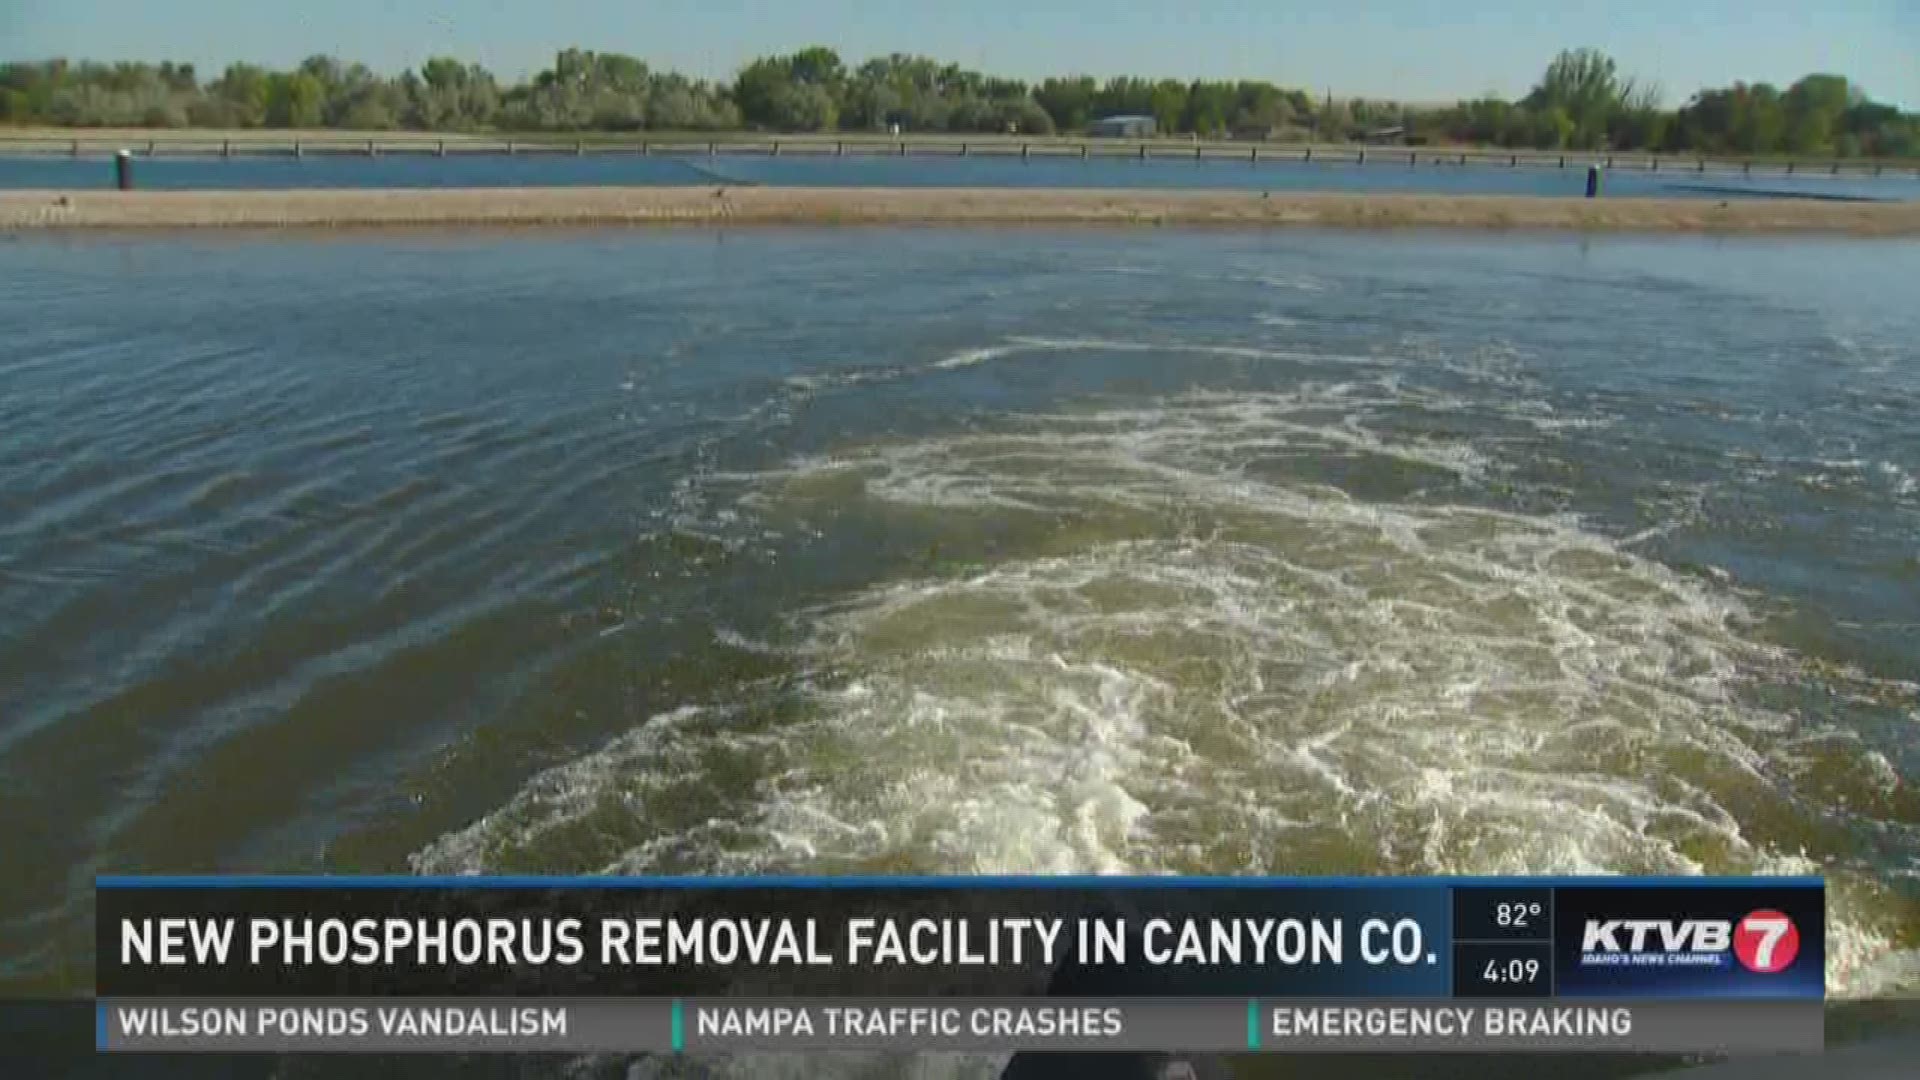 The water treatment facility removes phosphorus in the Boise River.